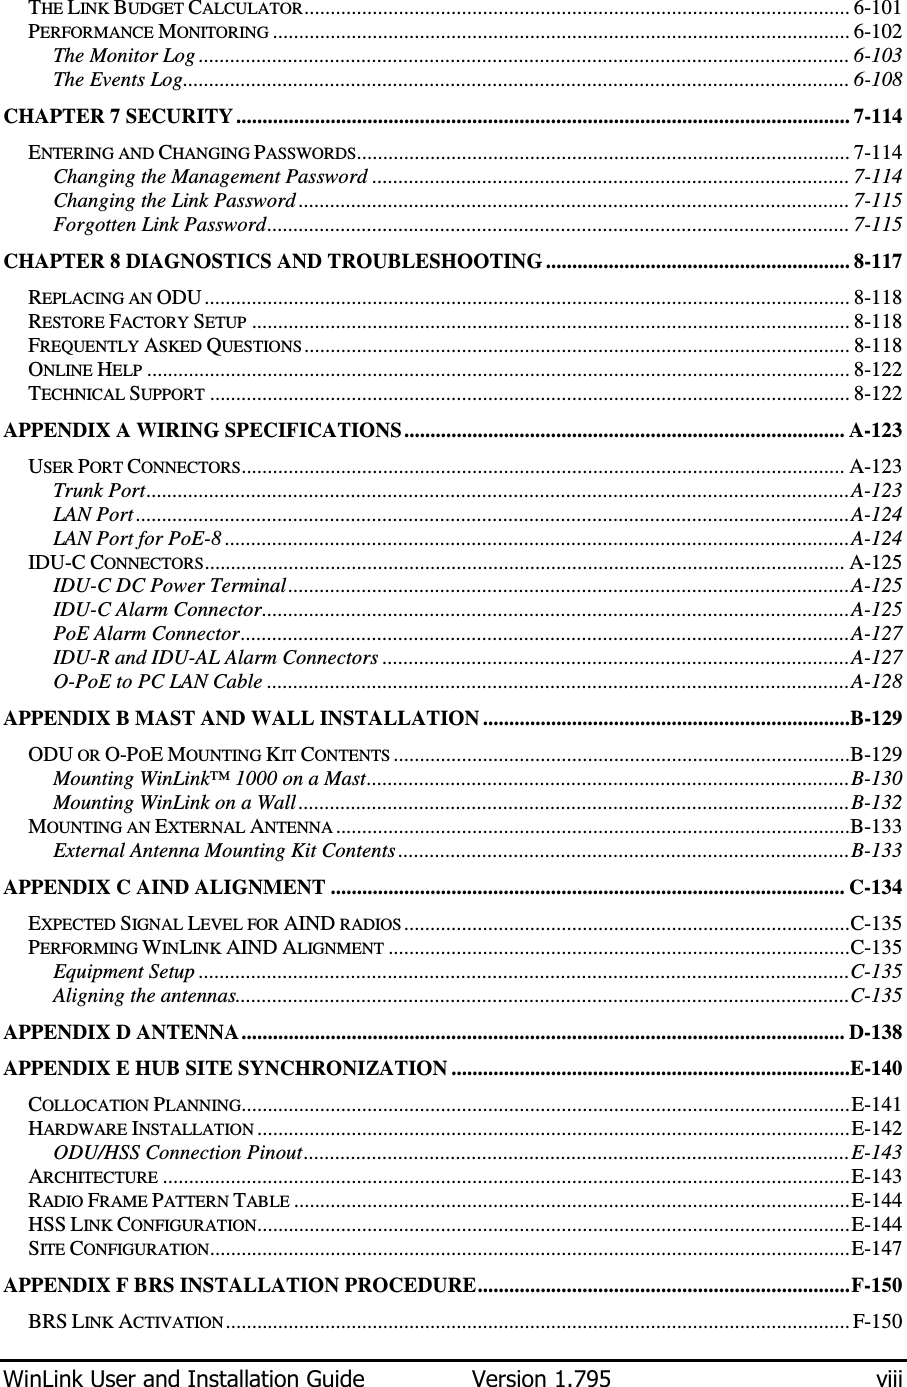  WinLink User and Installation Guide  Version 1.795  viii  THE LINK BUDGET CALCULATOR........................................................................................................ 6-101 PERFORMANCE MONITORING .............................................................................................................. 6-102 The Monitor Log ............................................................................................................................ 6-103 The Events Log............................................................................................................................... 6-108 CHAPTER 7 SECURITY..................................................................................................................... 7-114 ENTERING AND CHANGING PASSWORDS.............................................................................................. 7-114 Changing the Management Password ........................................................................................... 7-114 Changing the Link Password ......................................................................................................... 7-115 Forgotten Link Password............................................................................................................... 7-115 CHAPTER 8 DIAGNOSTICS AND TROUBLESHOOTING .......................................................... 8-117 REPLACING AN ODU ........................................................................................................................... 8-118 RESTORE FACTORY SETUP .................................................................................................................. 8-118 FREQUENTLY ASKED QUESTIONS ........................................................................................................ 8-118 ONLINE HELP ...................................................................................................................................... 8-122 TECHNICAL SUPPORT .......................................................................................................................... 8-122 APPENDIX A WIRING SPECIFICATIONS.................................................................................... A-123 USER PORT CONNECTORS................................................................................................................... A-123 Trunk Port......................................................................................................................................A-123 LAN Port ........................................................................................................................................A-124 LAN Port for PoE-8 .......................................................................................................................A-124 IDU-C CONNECTORS.......................................................................................................................... A-125 IDU-C DC Power Terminal...........................................................................................................A-125 IDU-C Alarm Connector................................................................................................................A-125 PoE Alarm Connector....................................................................................................................A-127 IDU-R and IDU-AL Alarm Connectors .........................................................................................A-127 O-PoE to PC LAN Cable ...............................................................................................................A-128 APPENDIX B MAST AND WALL INSTALLATION ......................................................................B-129 ODU OR O-POE MOUNTING KIT CONTENTS .......................................................................................B-129 Mounting WinLink™ 1000 on a Mast............................................................................................B-130 Mounting WinLink on a Wall .........................................................................................................B-132 MOUNTING AN EXTERNAL ANTENNA ..................................................................................................B-133 External Antenna Mounting Kit Contents ......................................................................................B-133 APPENDIX C AIND ALIGNMENT .................................................................................................. C-134 EXPECTED SIGNAL LEVEL FOR AIND RADIOS .....................................................................................C-135 PERFORMING WINLINK AIND ALIGNMENT ........................................................................................C-135 Equipment Setup ............................................................................................................................C-135 Aligning the antennas.....................................................................................................................C-135 APPENDIX D ANTENNA................................................................................................................... D-138 APPENDIX E HUB SITE SYNCHRONIZATION ............................................................................E-140 COLLOCATION PLANNING....................................................................................................................E-141 HARDWARE INSTALLATION .................................................................................................................E-142 ODU/HSS Connection Pinout........................................................................................................E-143 ARCHITECTURE ...................................................................................................................................E-143 RADIO FRAME PATTERN TABLE ..........................................................................................................E-144 HSS LINK CONFIGURATION.................................................................................................................E-144 SITE CONFIGURATION..........................................................................................................................E-147 APPENDIX F BRS INSTALLATION PROCEDURE.......................................................................F-150 BRS LINK ACTIVATION....................................................................................................................... F-150 